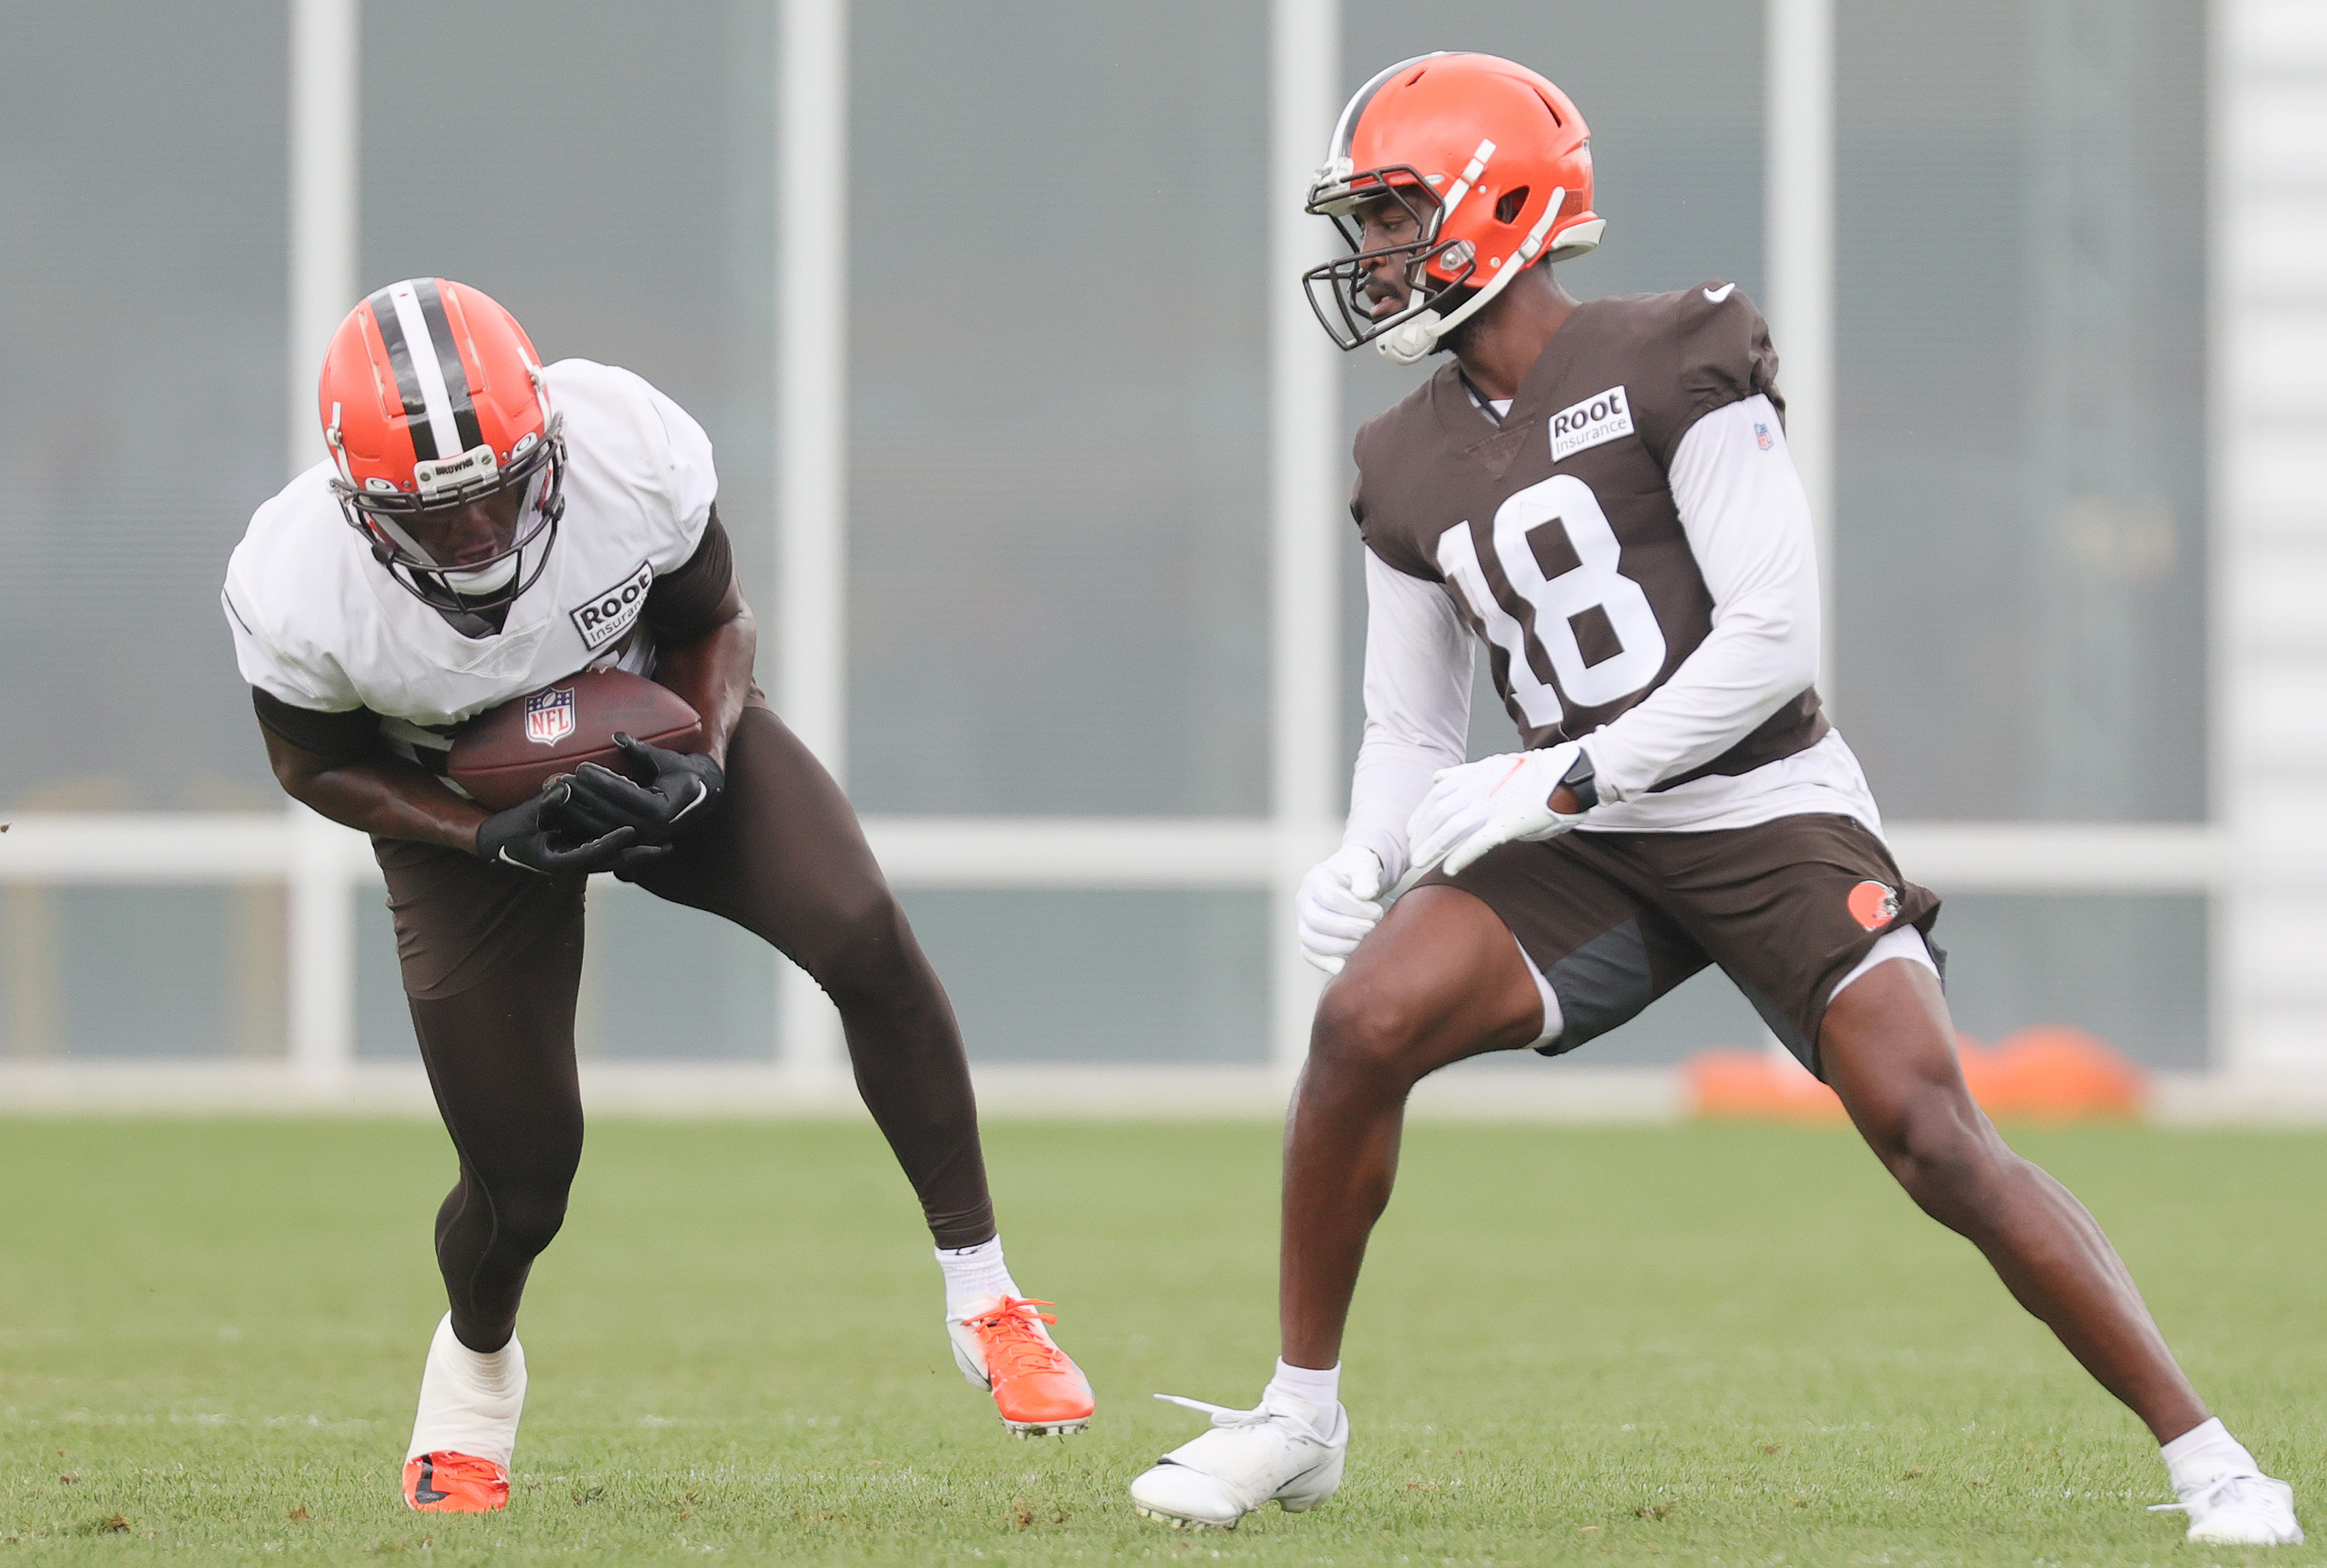 Cleveland Browns safety D'Anthony Bell, 2022-2023 season